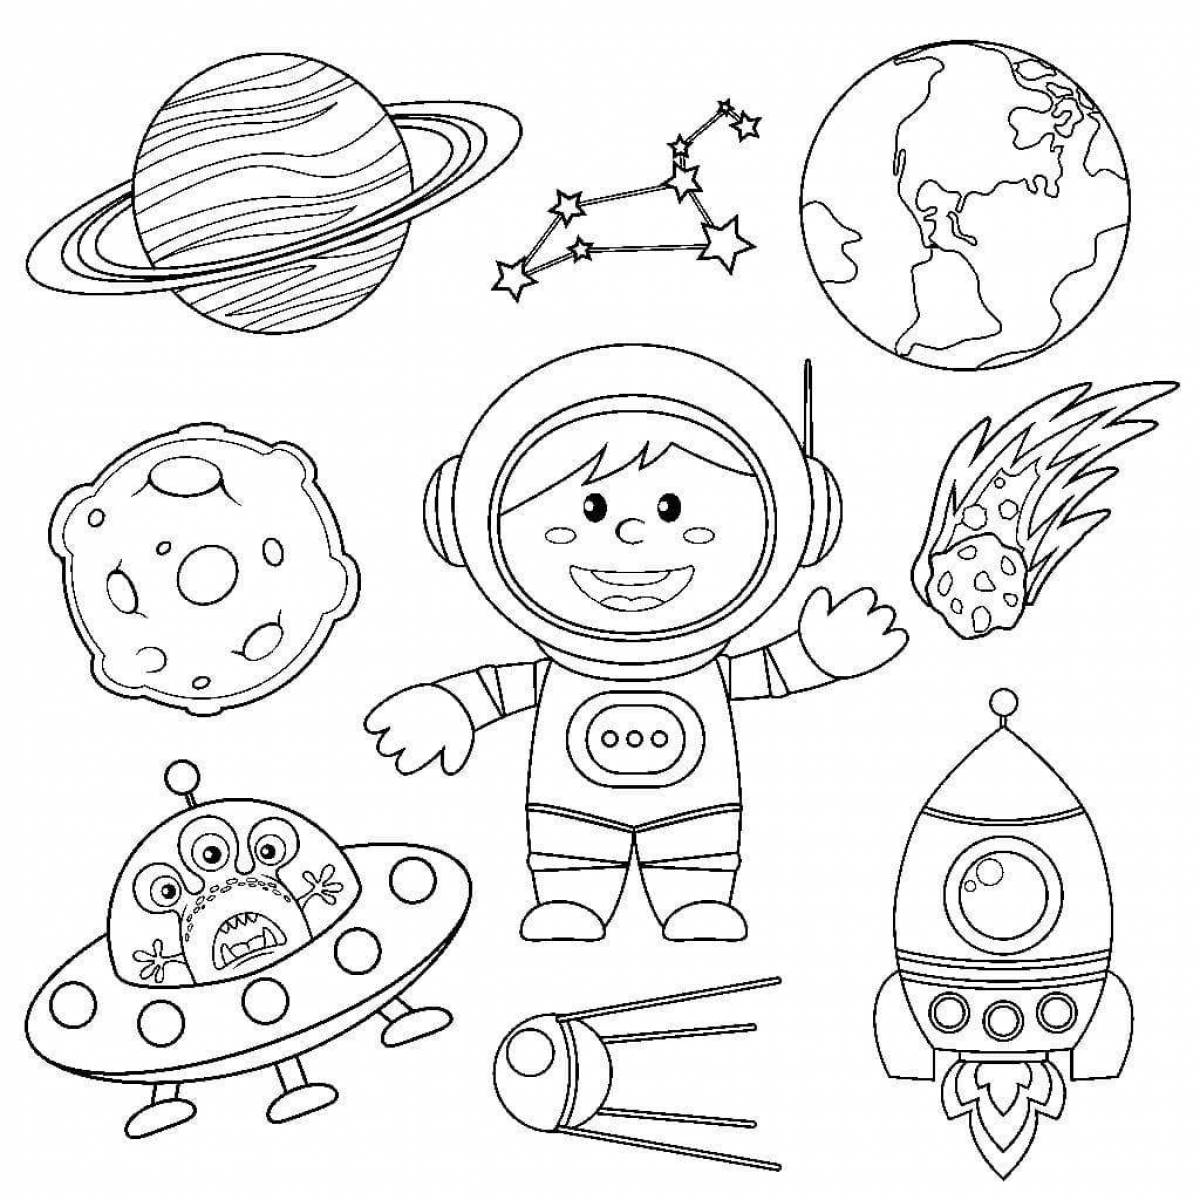 1st class playful space coloring book